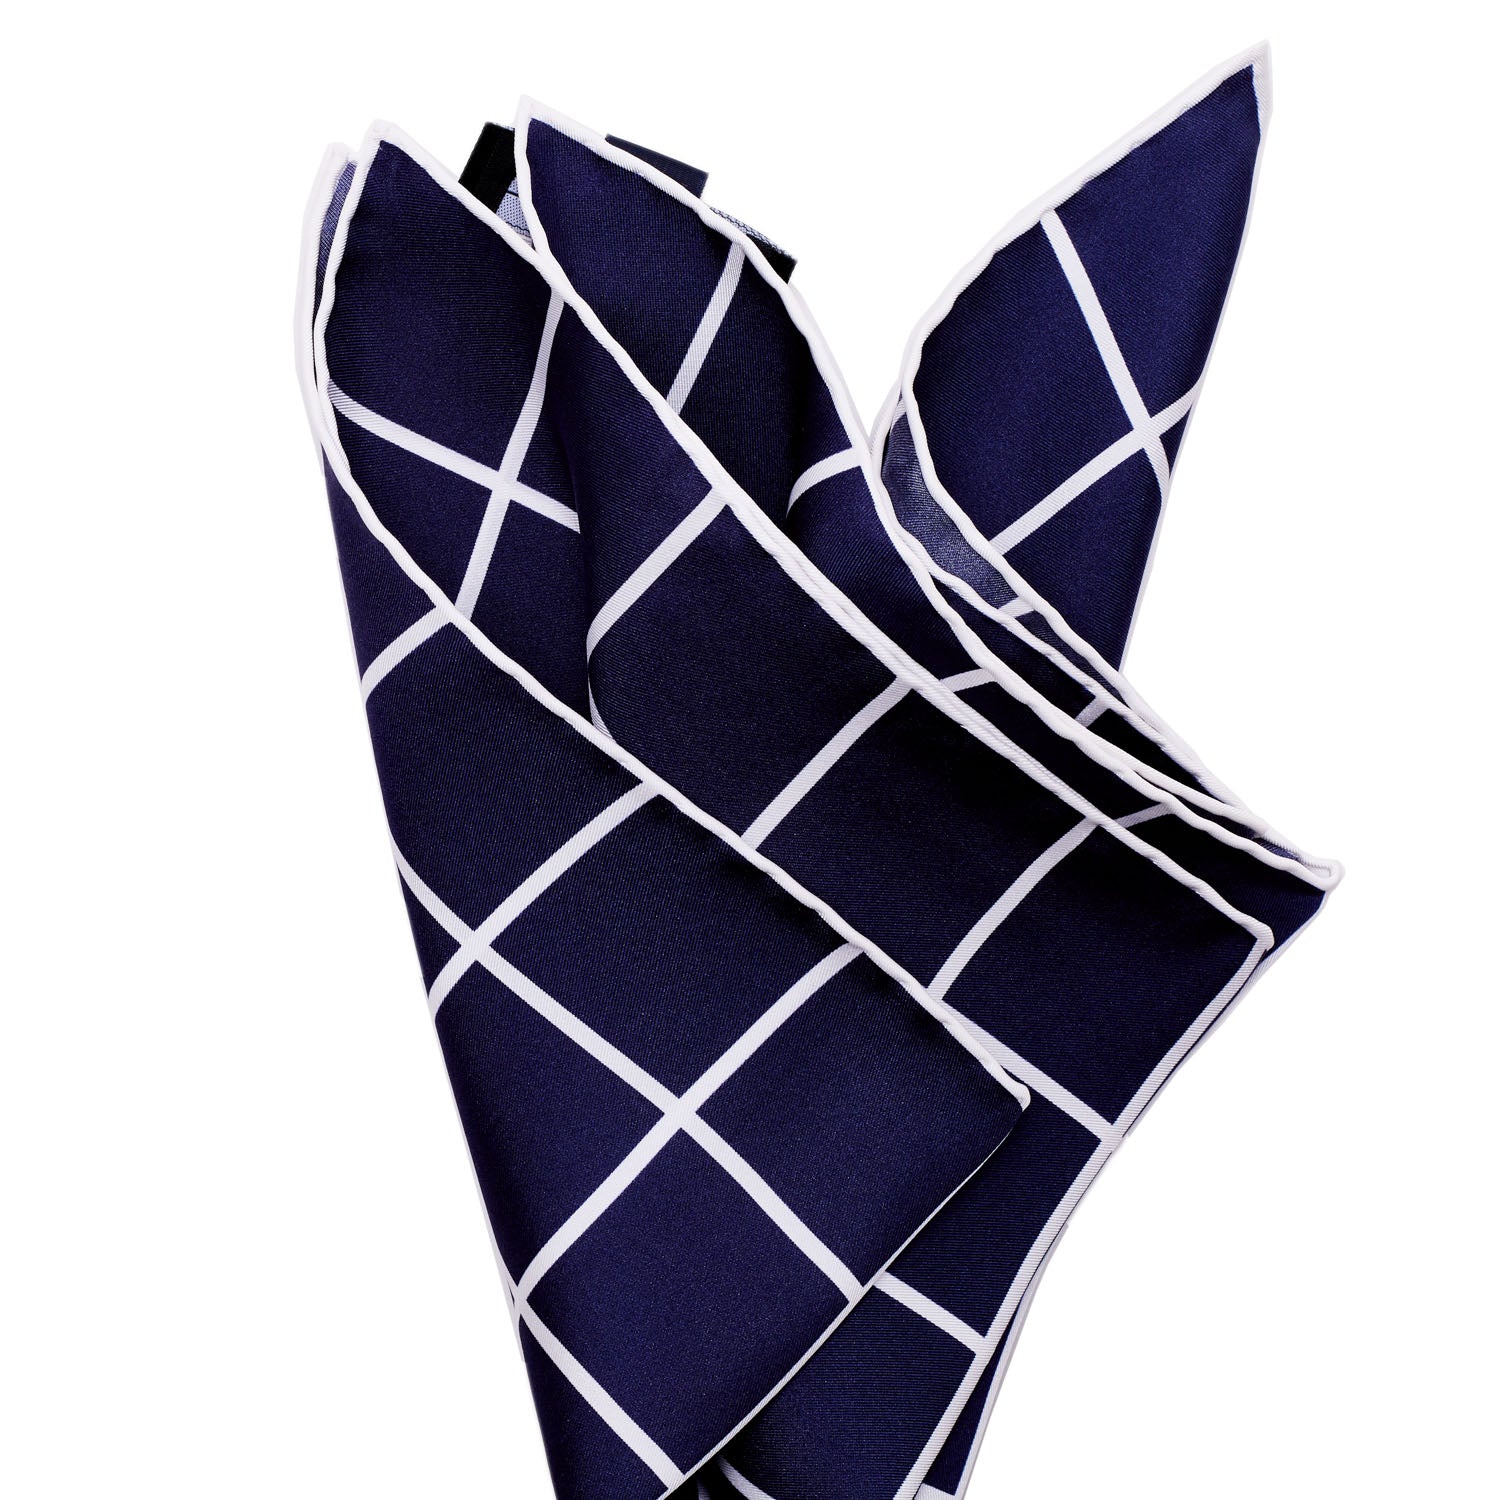 A silk Sovereign Grade Prince of Wales Pocket Square, Navy/White, featuring a blue and white Prince of Wales design, showcased against a pristine white background from KirbyAllison.com.